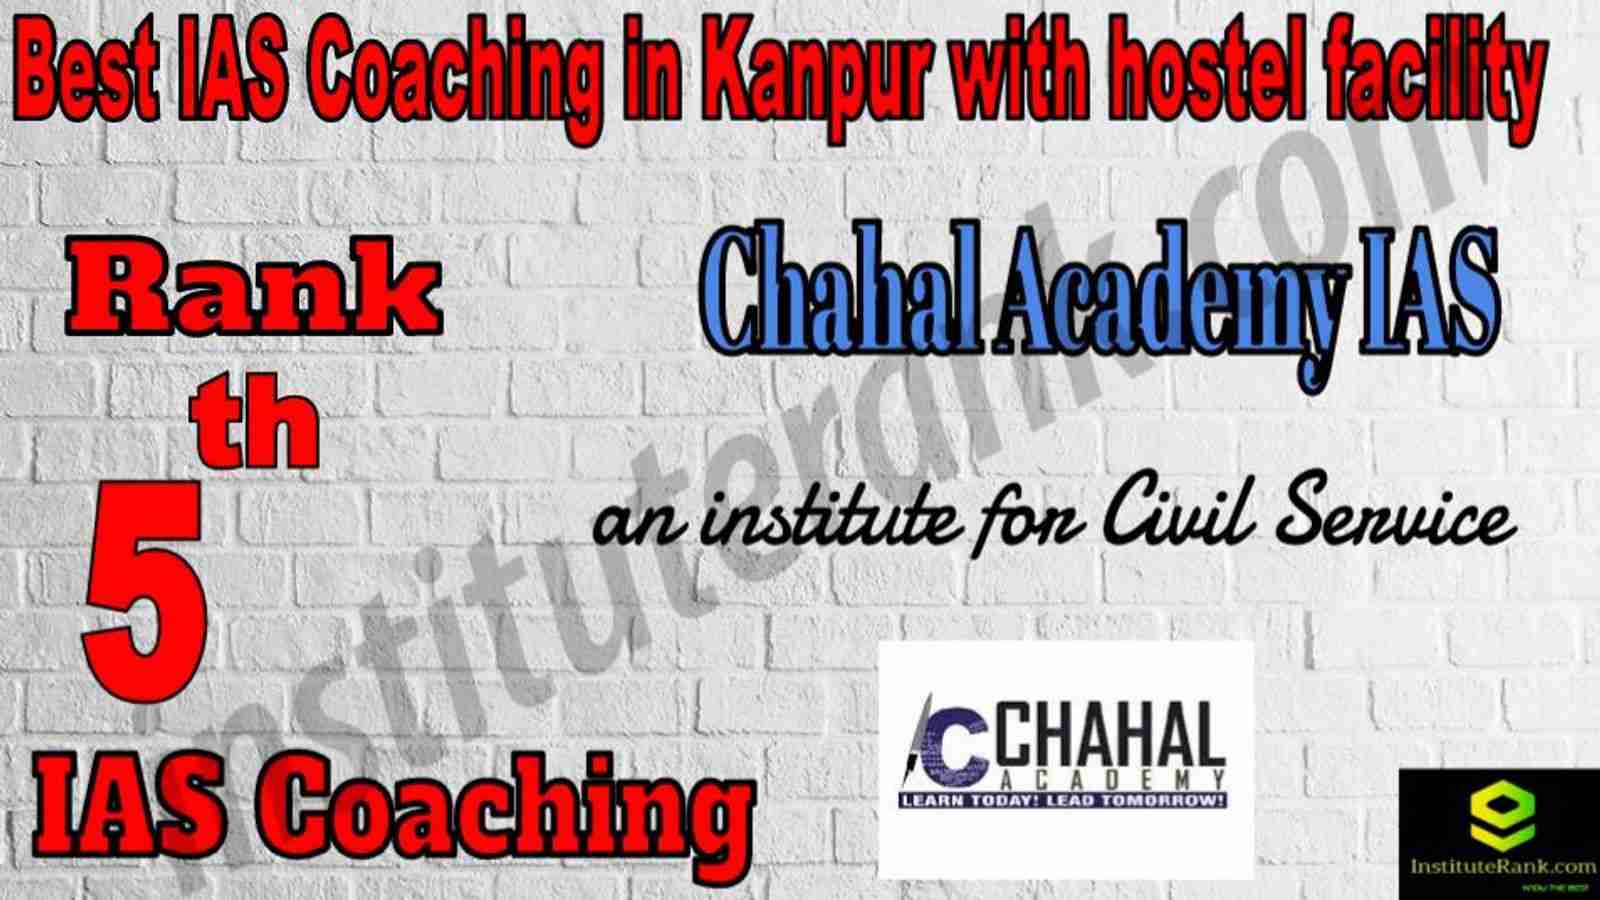 5th Best IAS Coaching in Kanpur With hostel facility